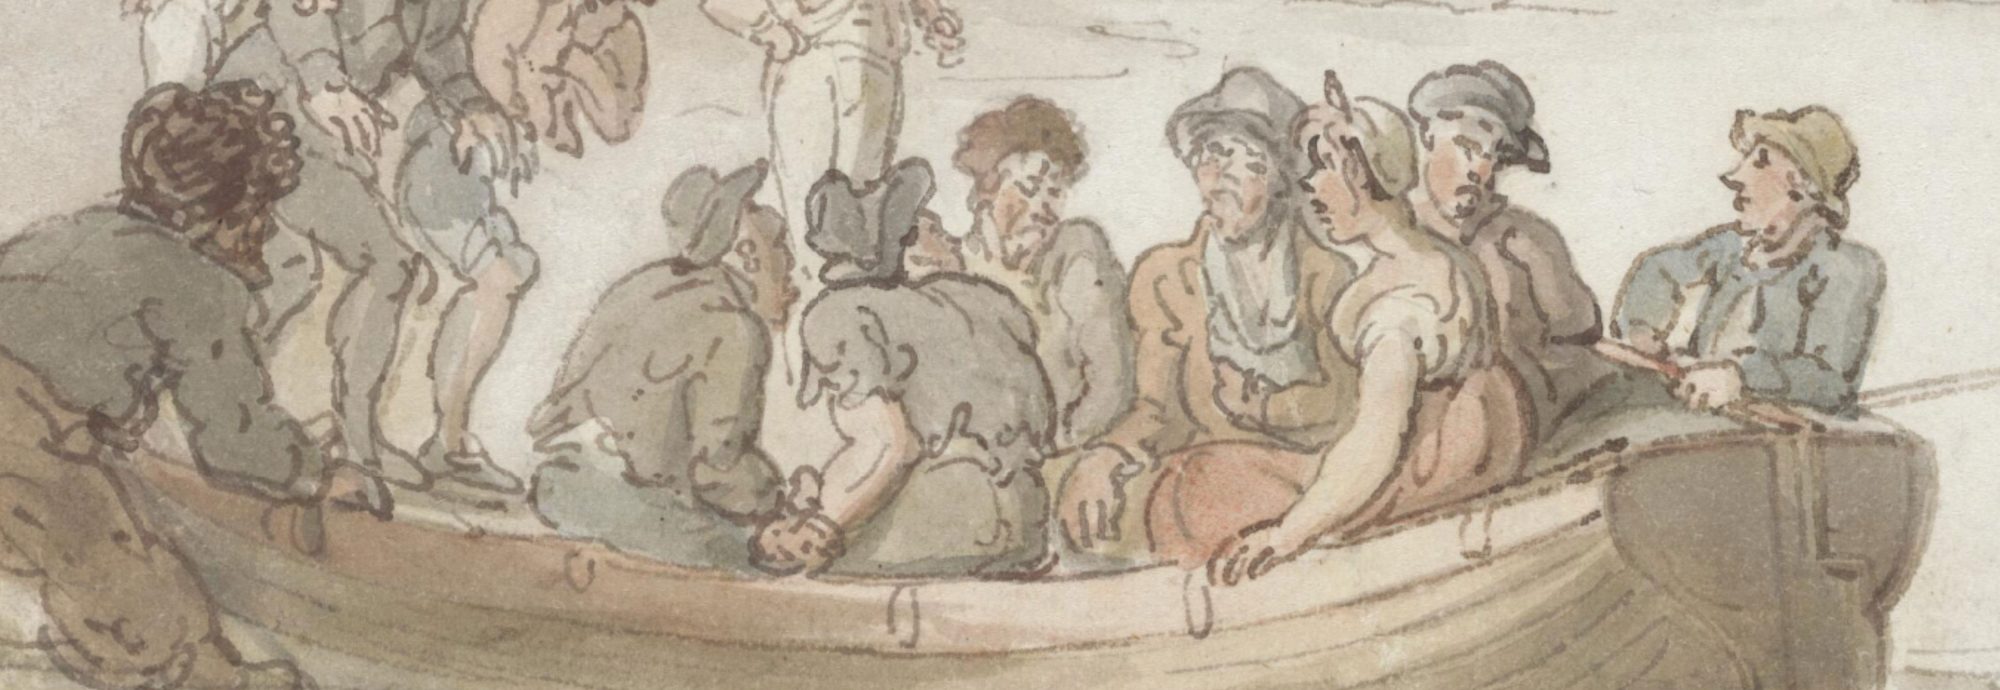 A painting of people aboard a wooden boat.